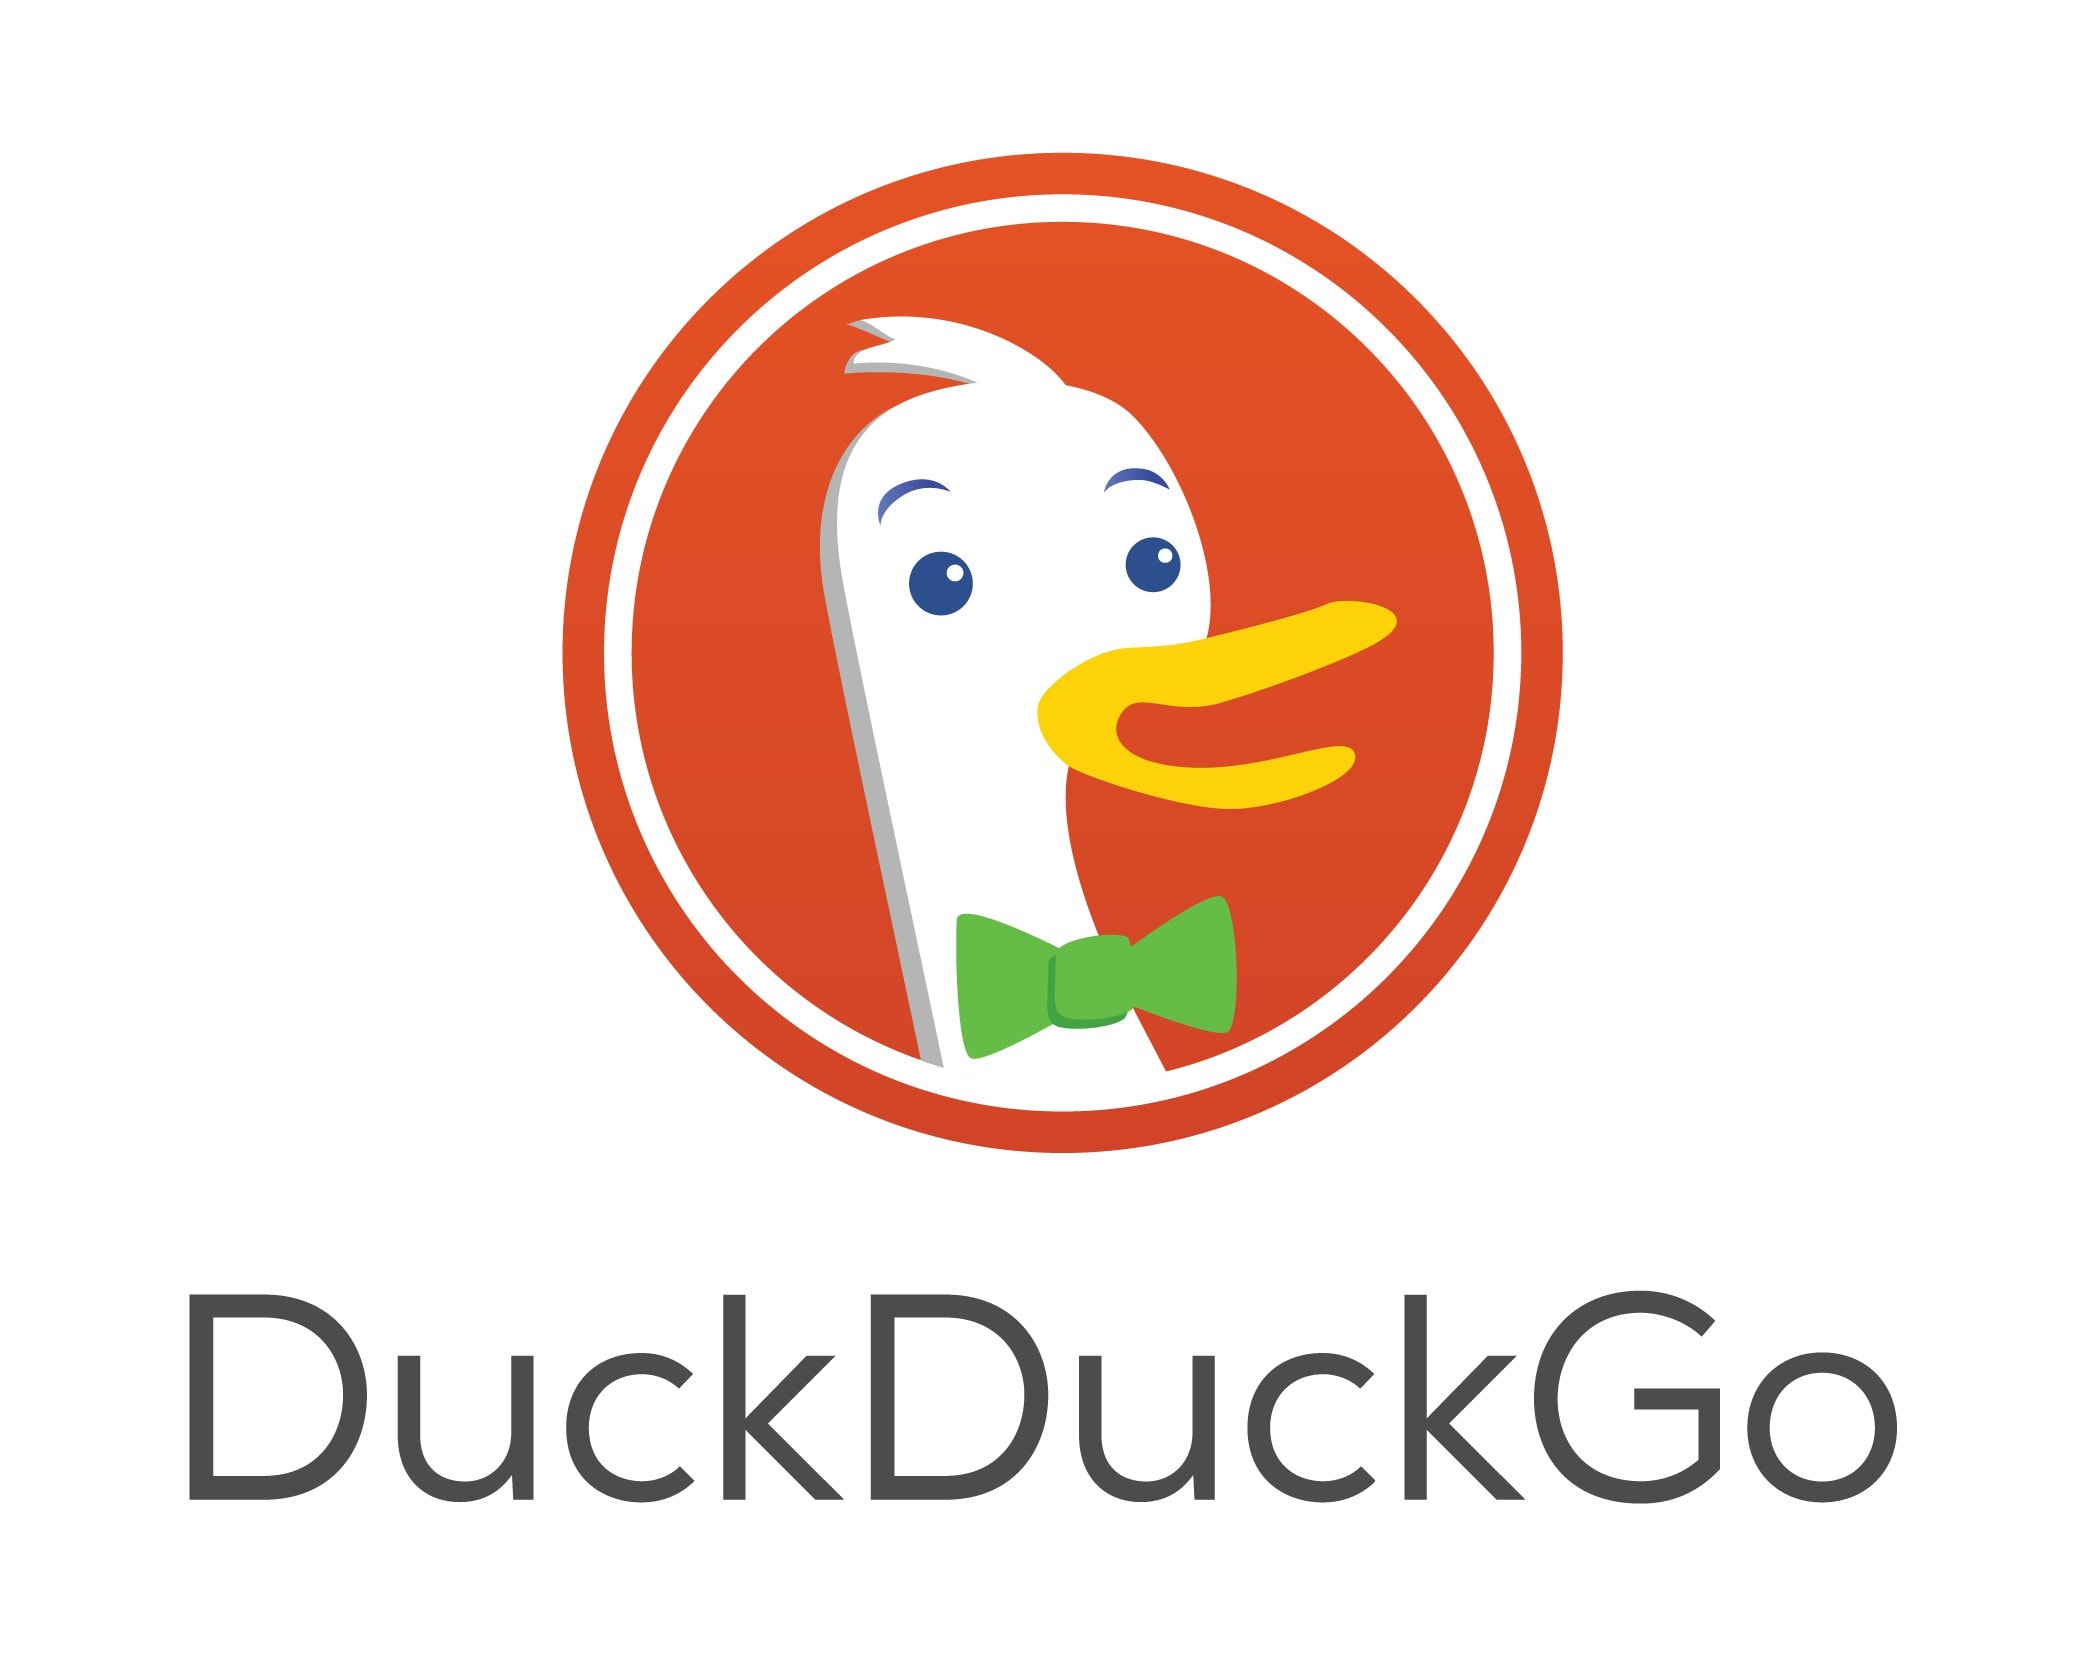 DuckDuckGo offers great image search, plus it doesn’t track you.